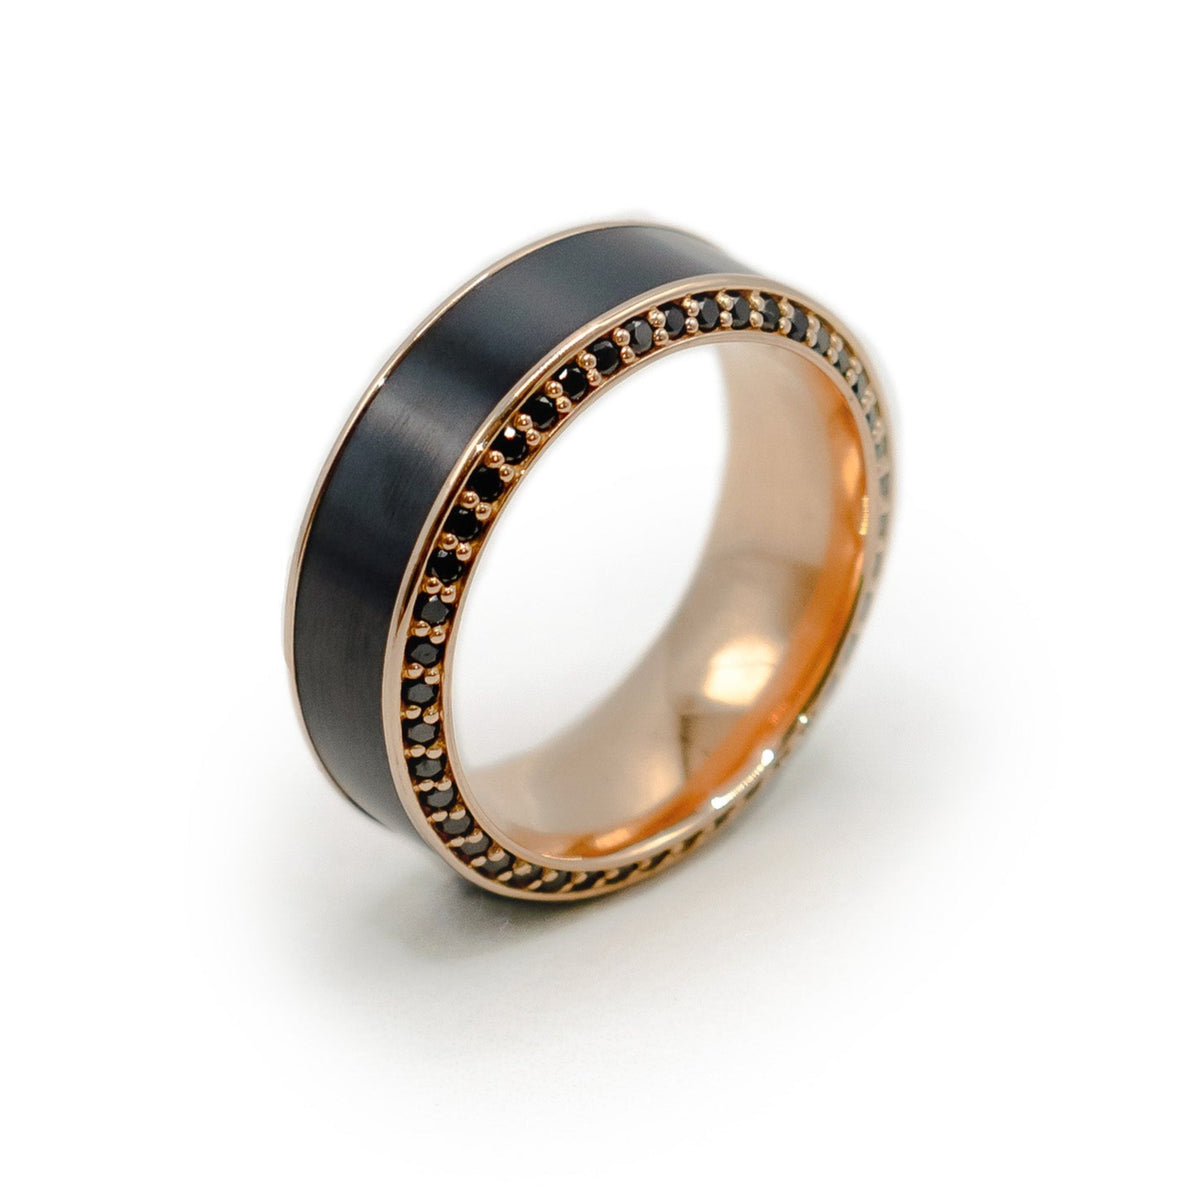 Helios Beveled with Black Diamond Insets in 18k Rose Gold Ring 8mm